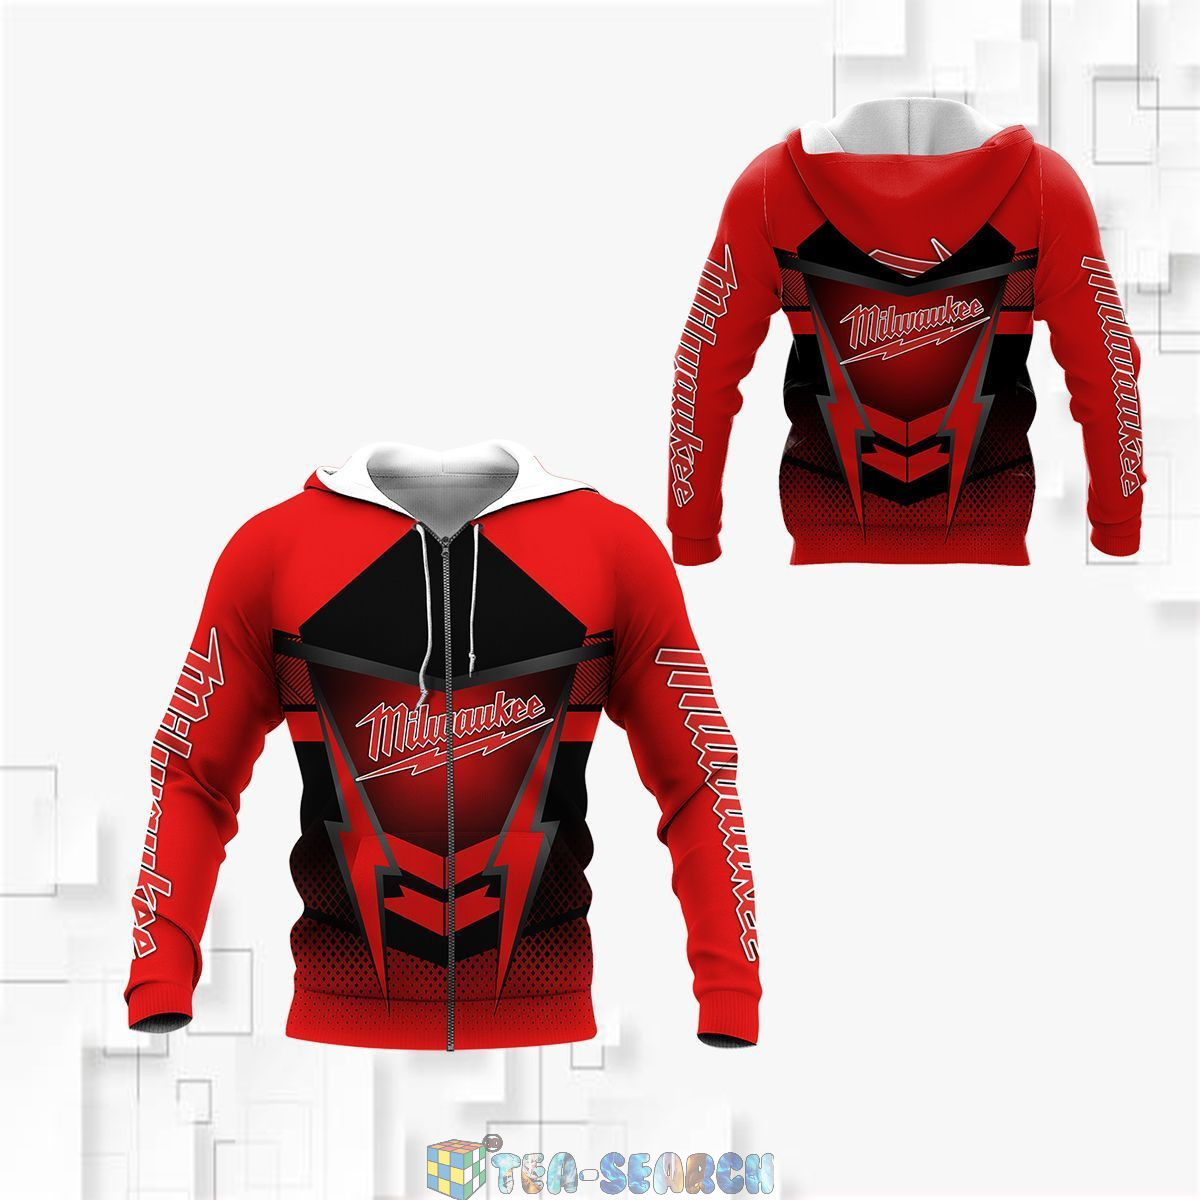 Milwaukee Tools ver 6 3D hoodie and t-shirt